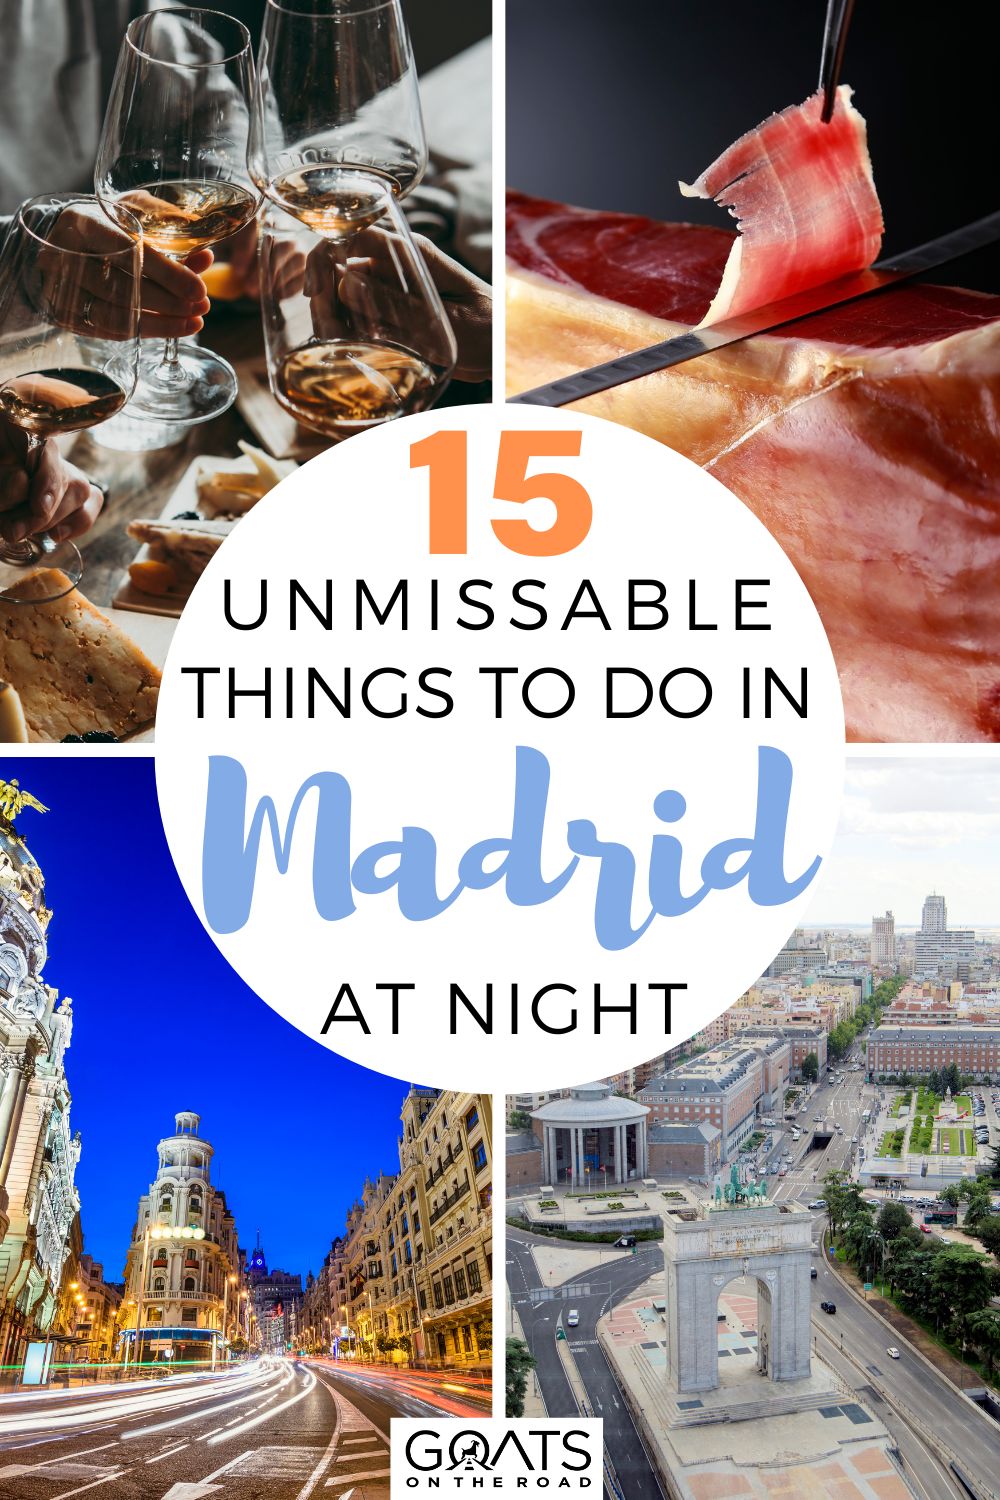 15 Unmissable Things To Do In Madrid At Night